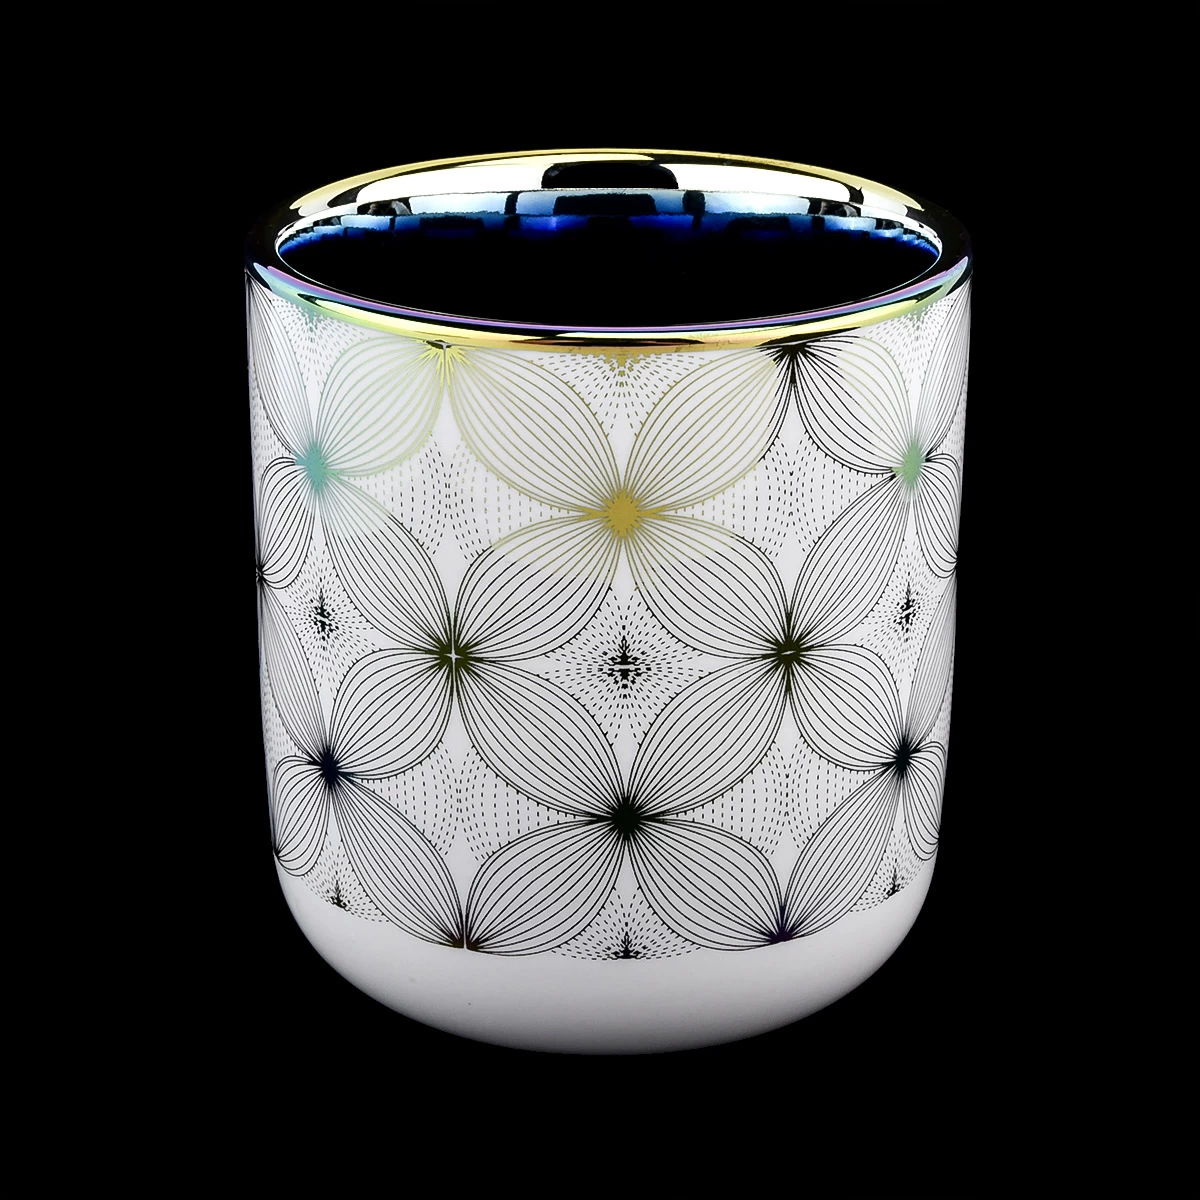 new electroplating ceramic candle jars Item No .: SGXYT20112716 Top dia: 88mm Bottom dia: 45mm Height: 98mm Weight: 309g Capacity: 405ml  MOQ: 3000 pieces new electroplating ceramic candle jars